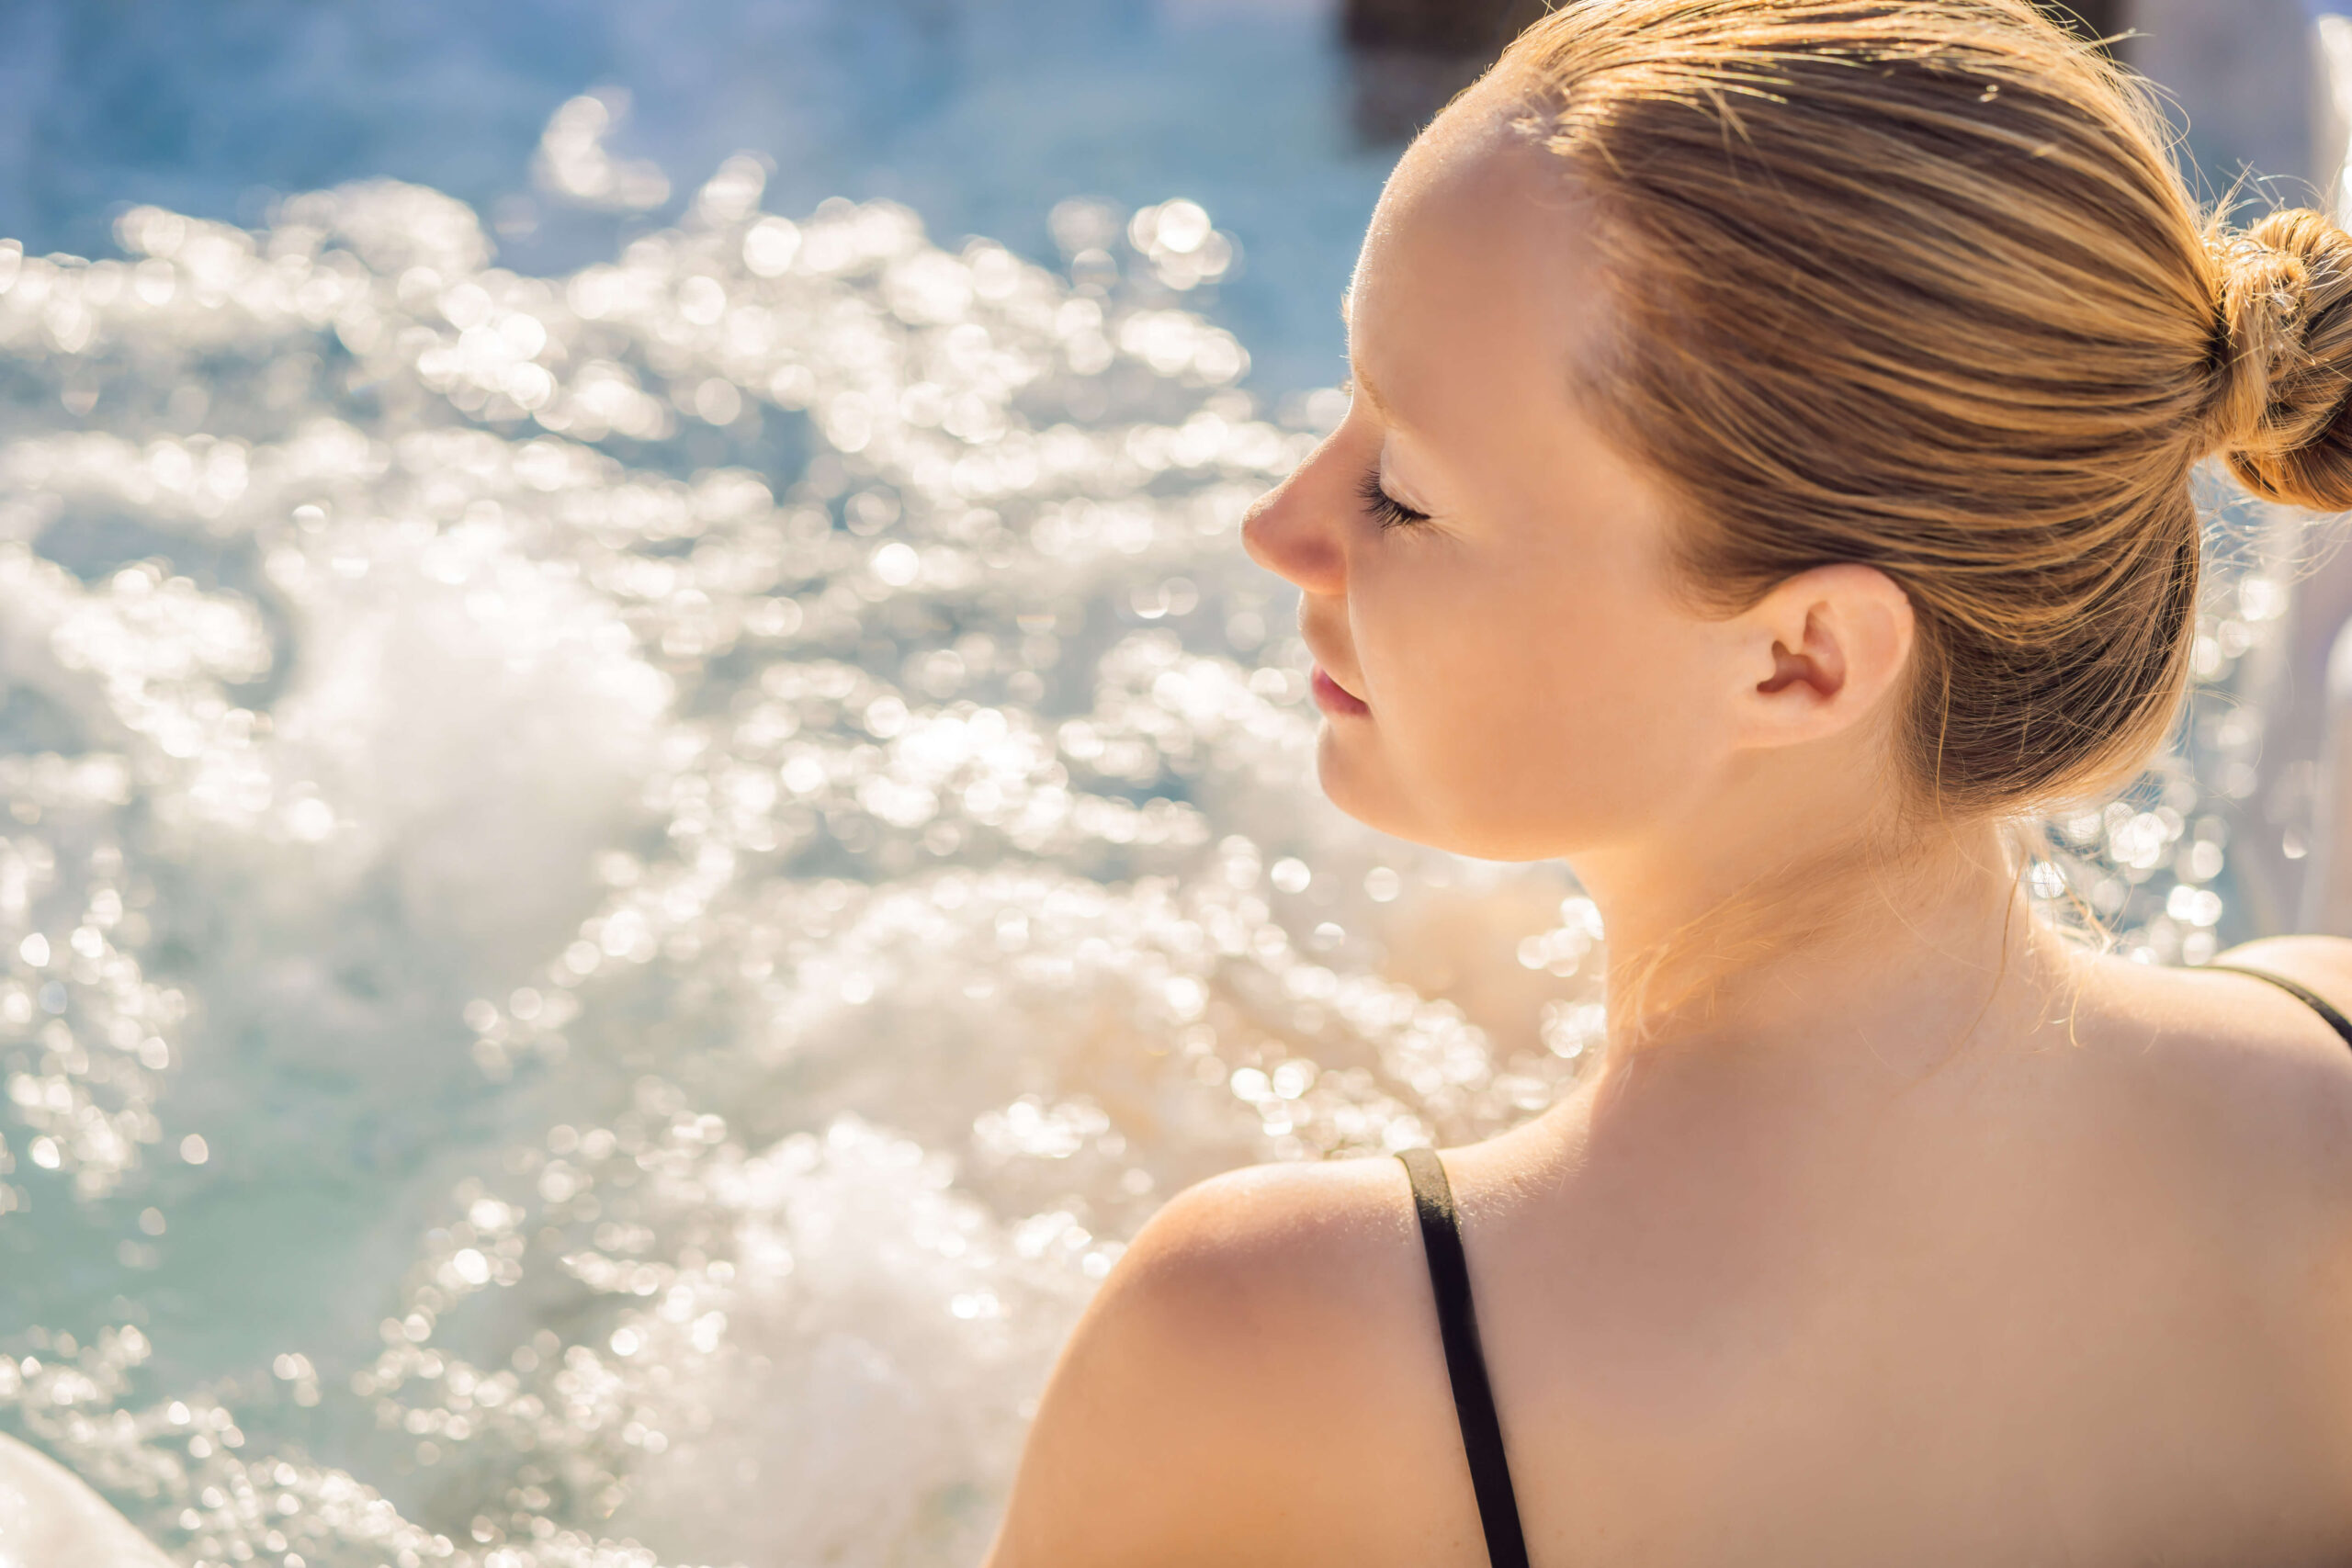 Enhance Your Self-Care Routine with a Hot Tub